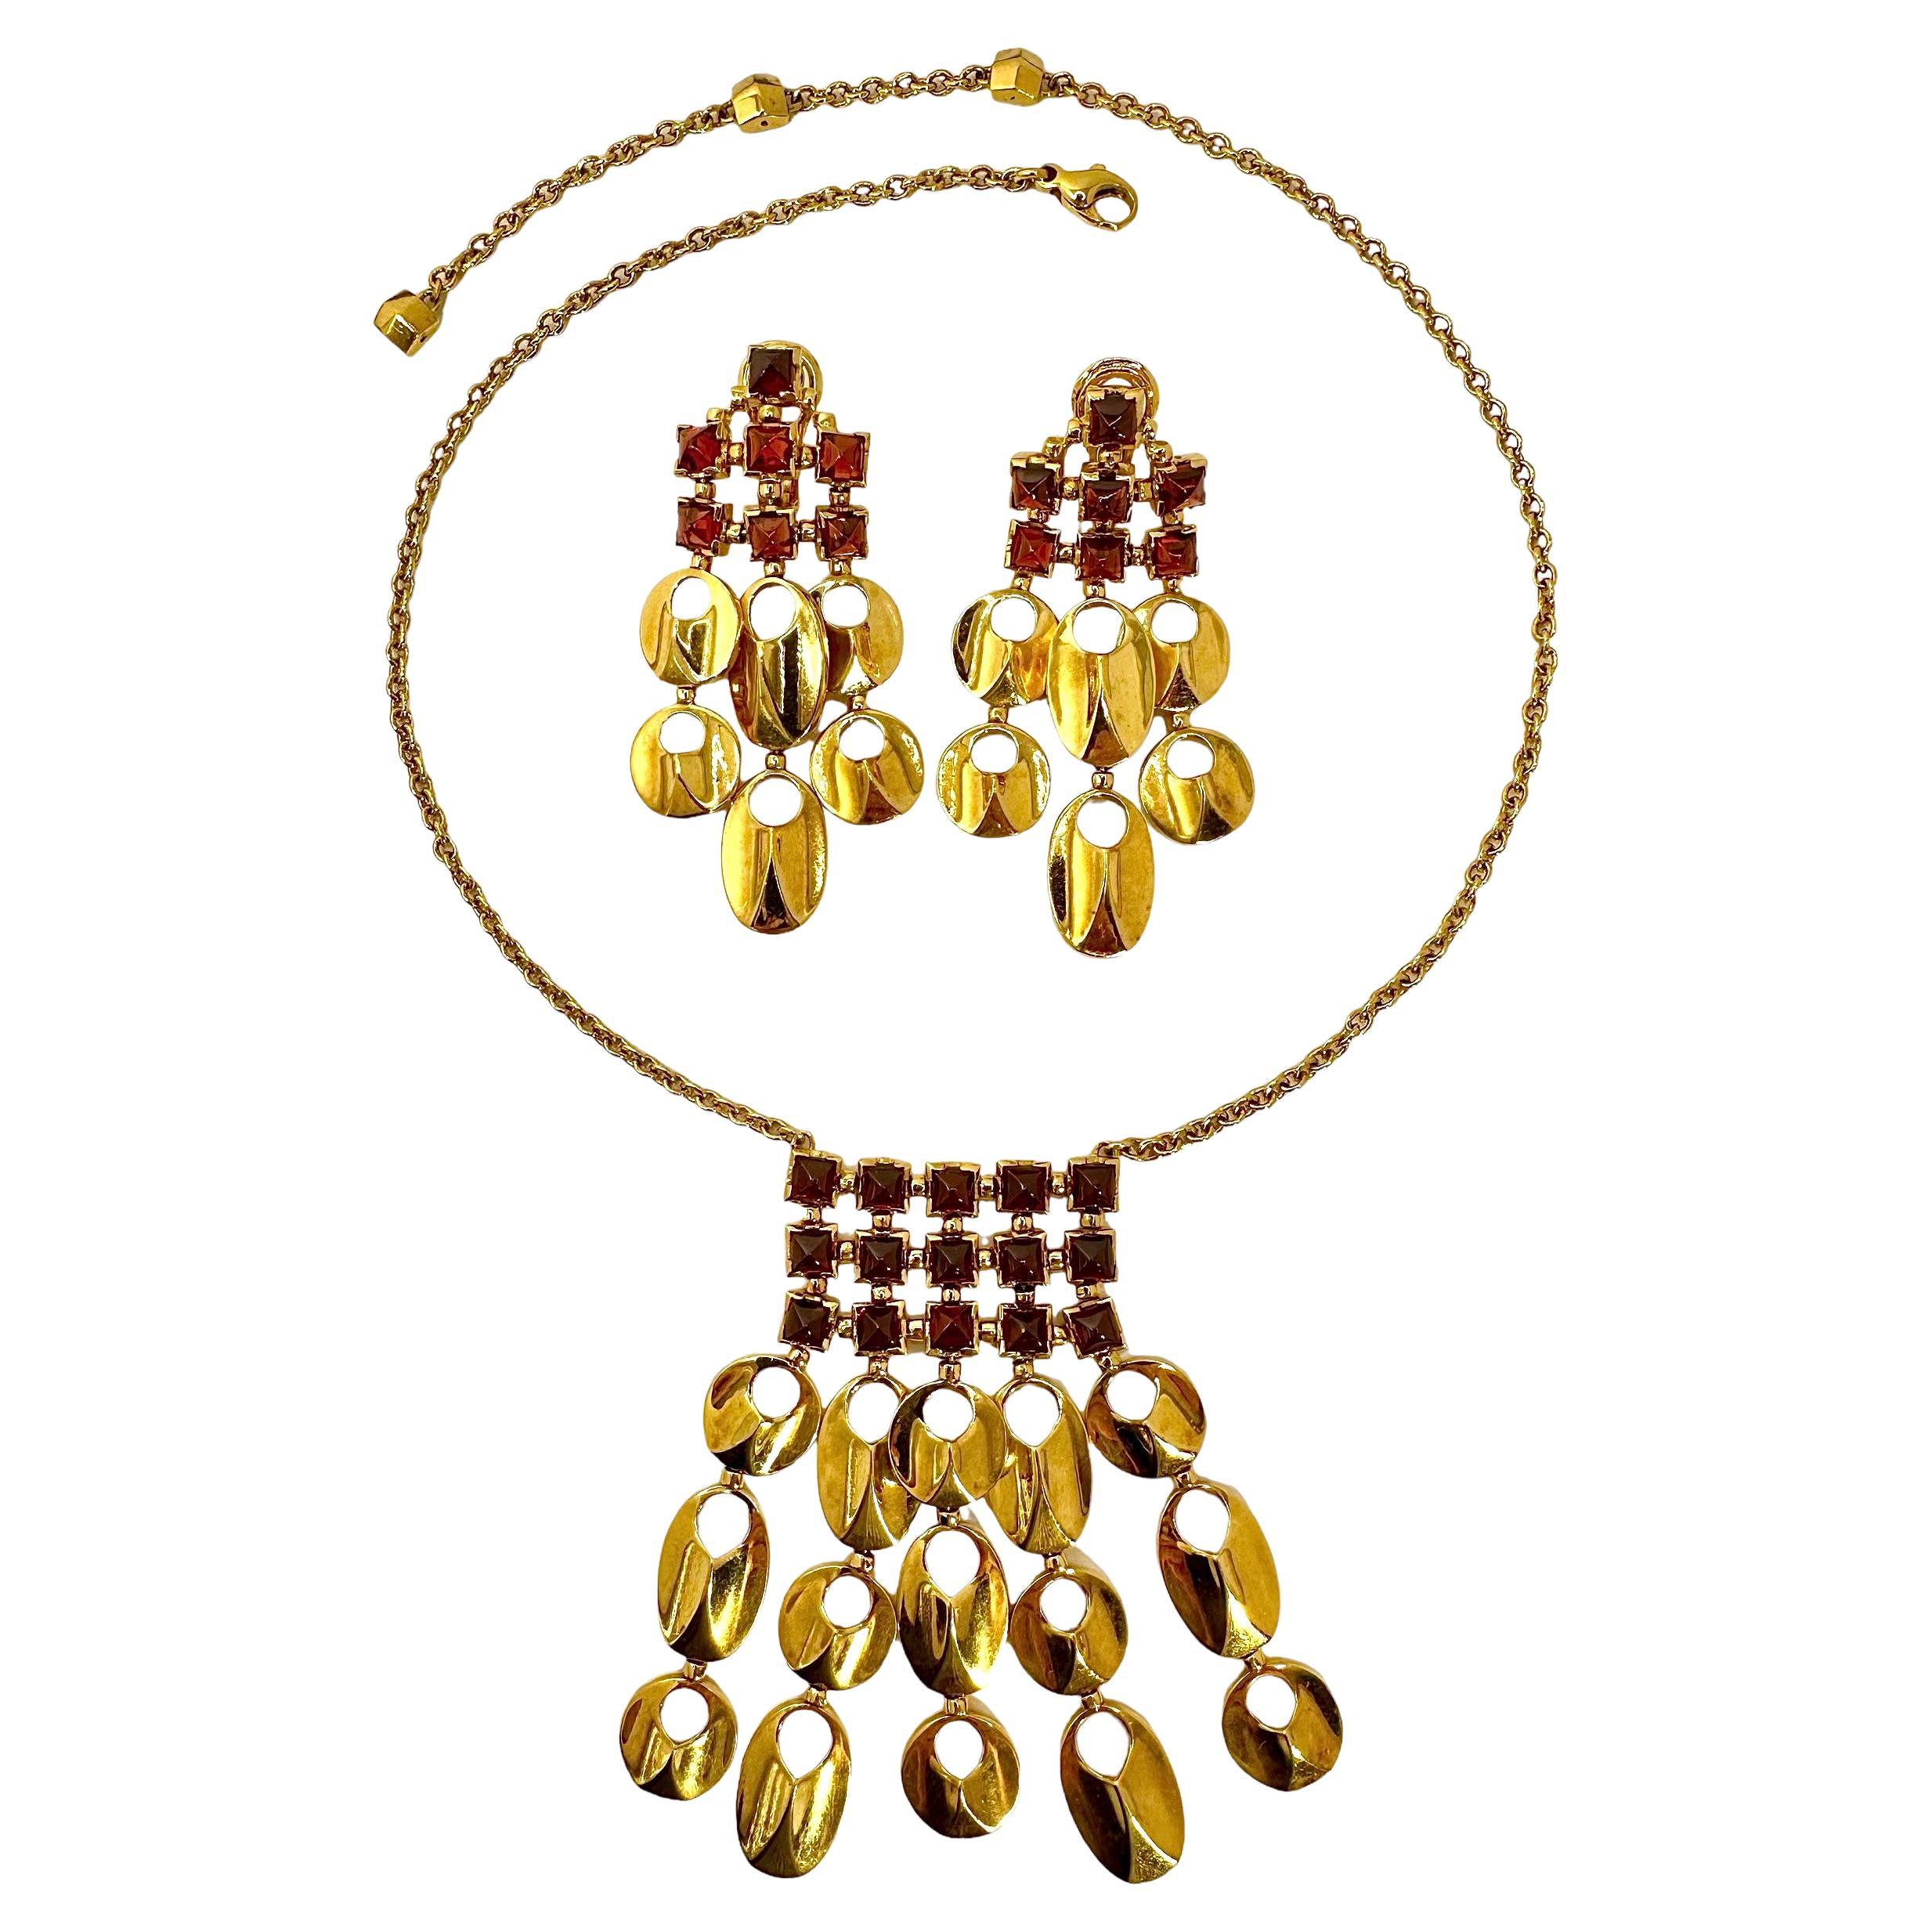 Playful 18k Yellow Gold and Sugar-loaf Citrine Necklace and Matching Earring Set